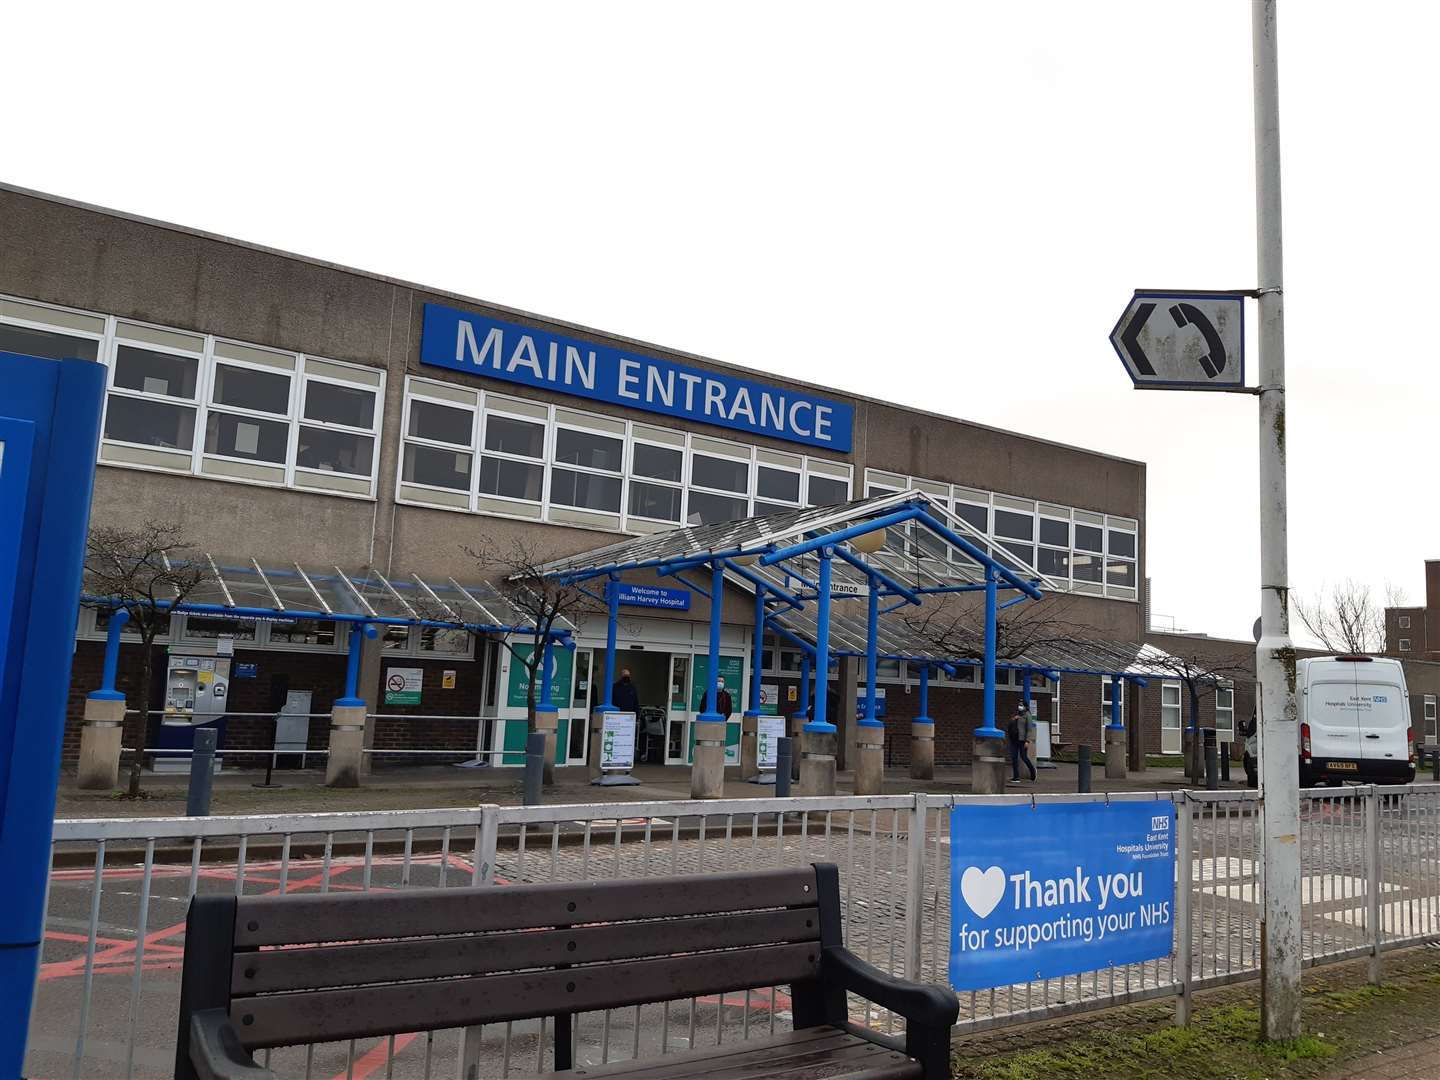 158 A&E patients left waiting 12 hours or more at East Kent